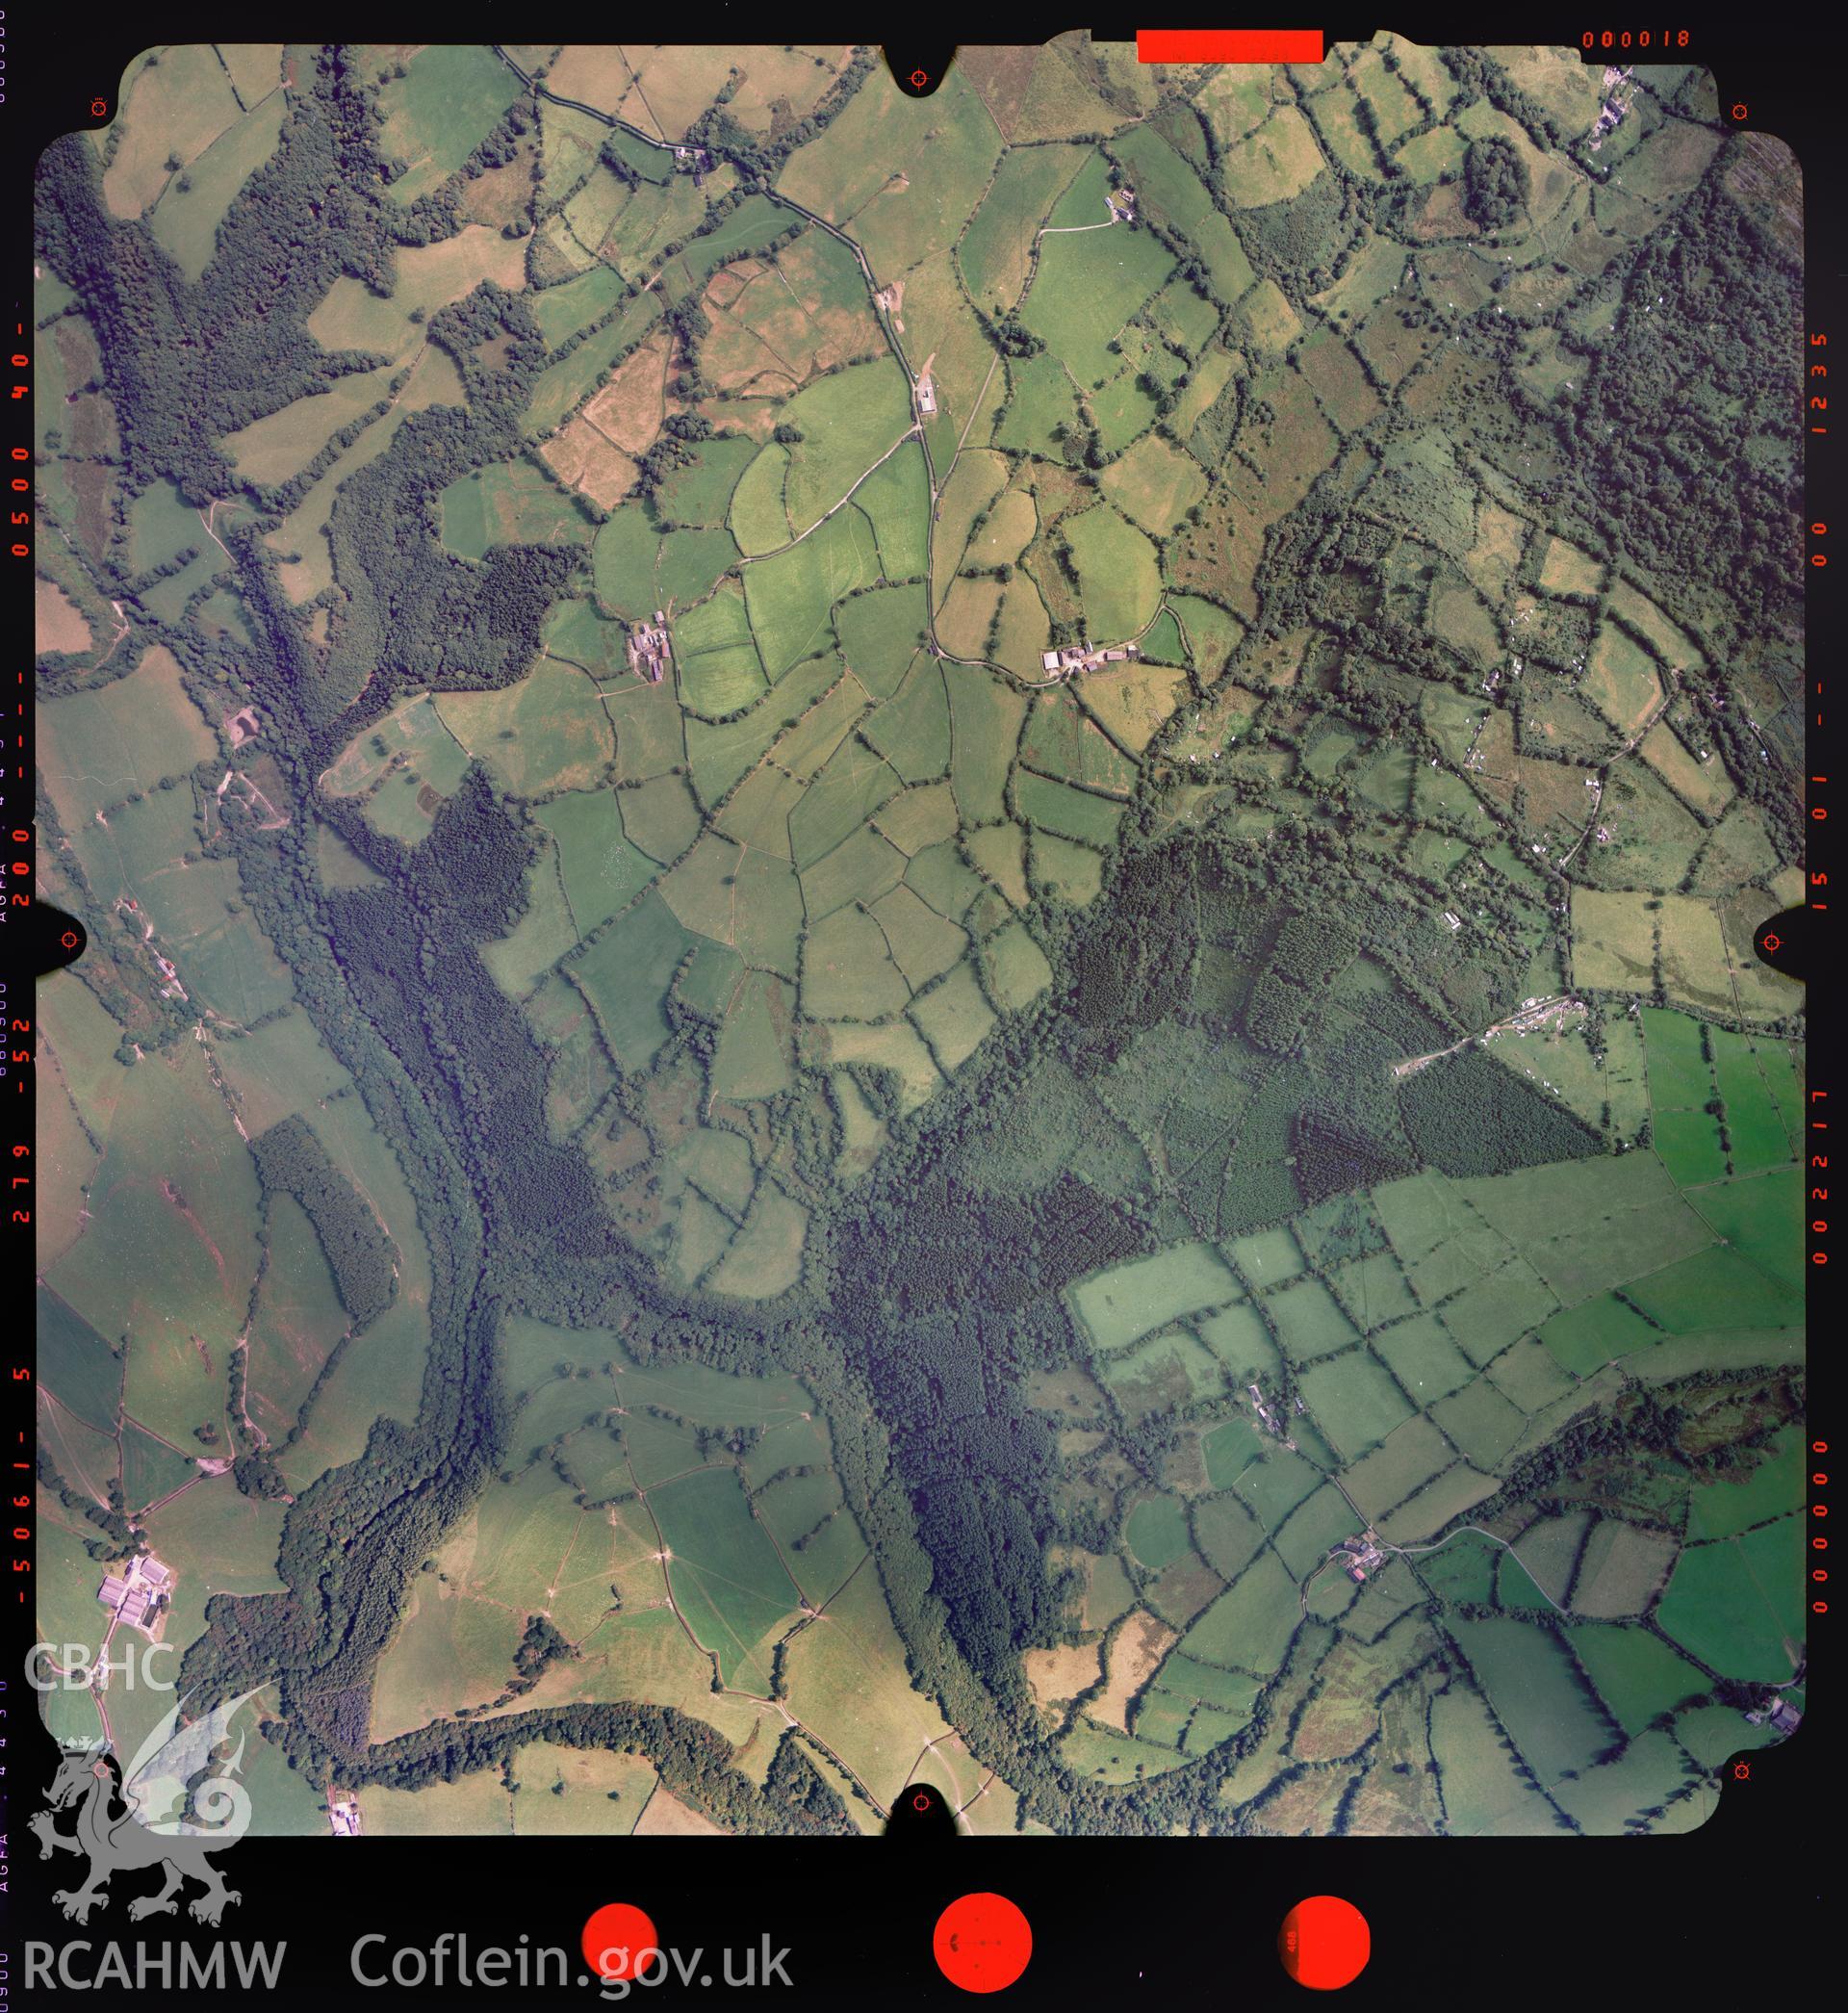 Digitized copy of a colour aerial photograph showing the area to the west of Talley, taken by Ordnance Survey, 2003.